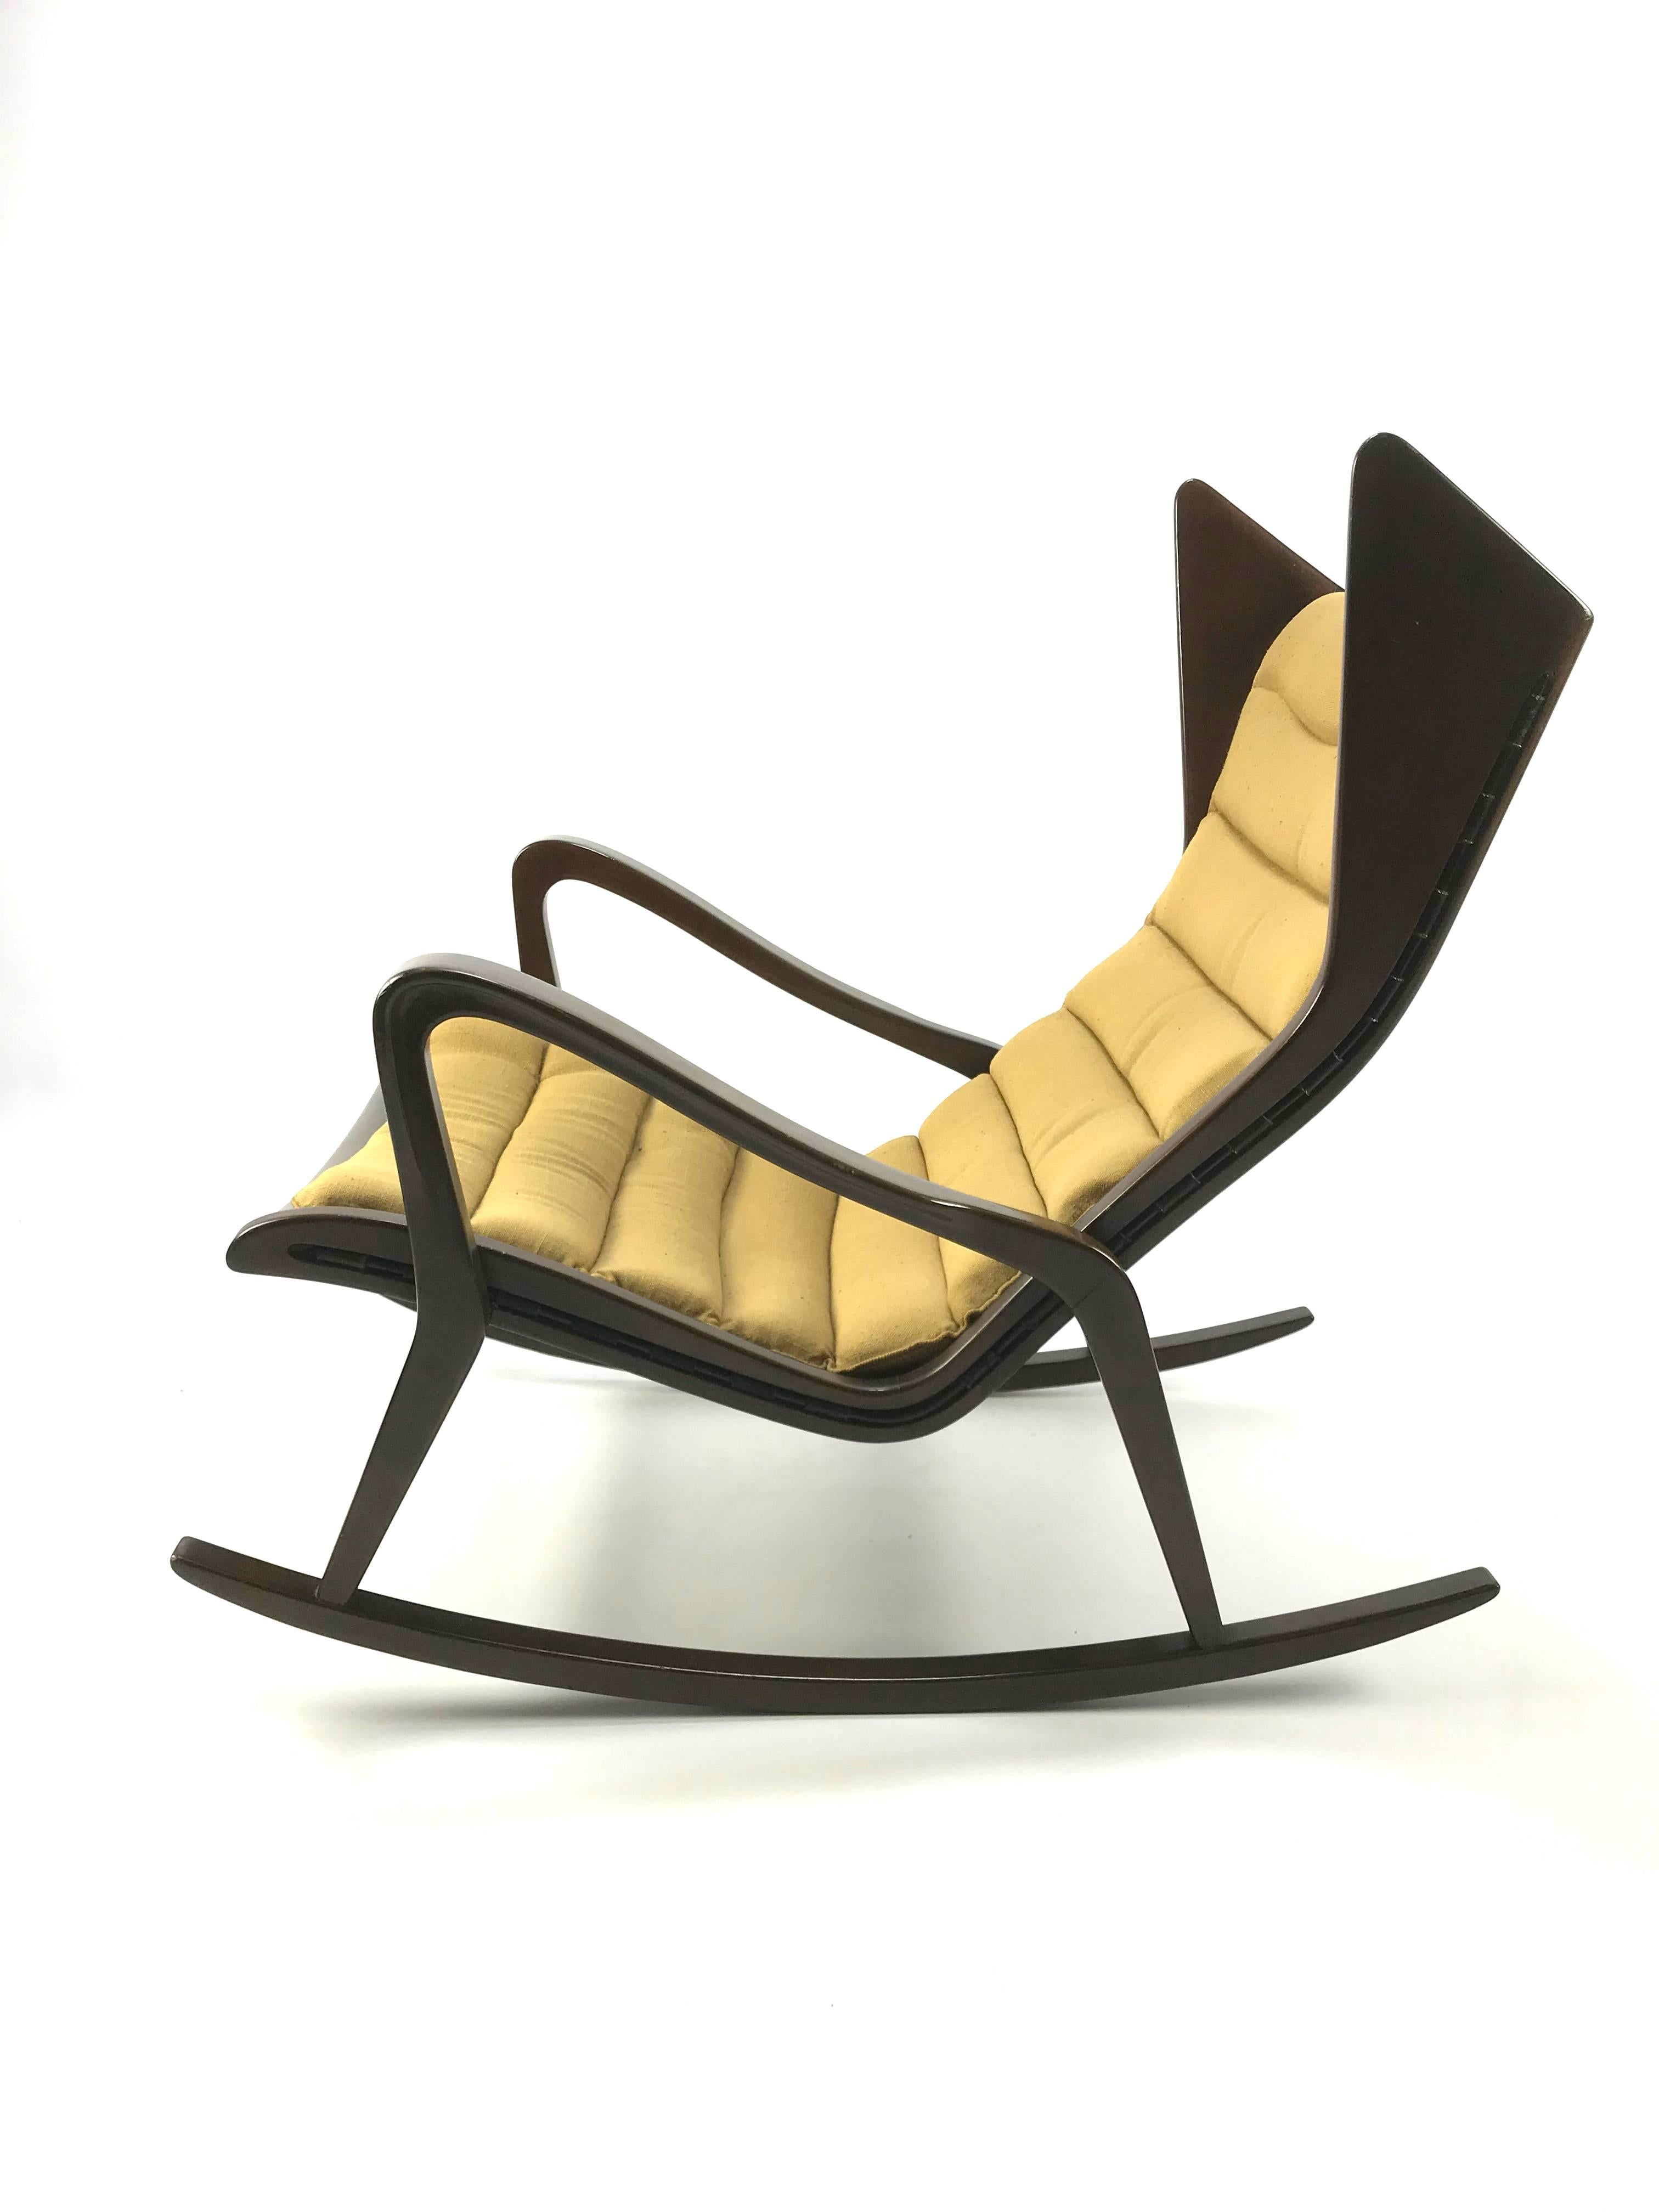 Rare rocking chair model 572 produced by Cassina, circa 1955. Conceived in walnut, fabric upholstering and rubber. 
According to Salvatore Licitra at the Gio Ponti Archives, Milan, this chair is likely to have been designed by Gio Ponti.
Beautiful